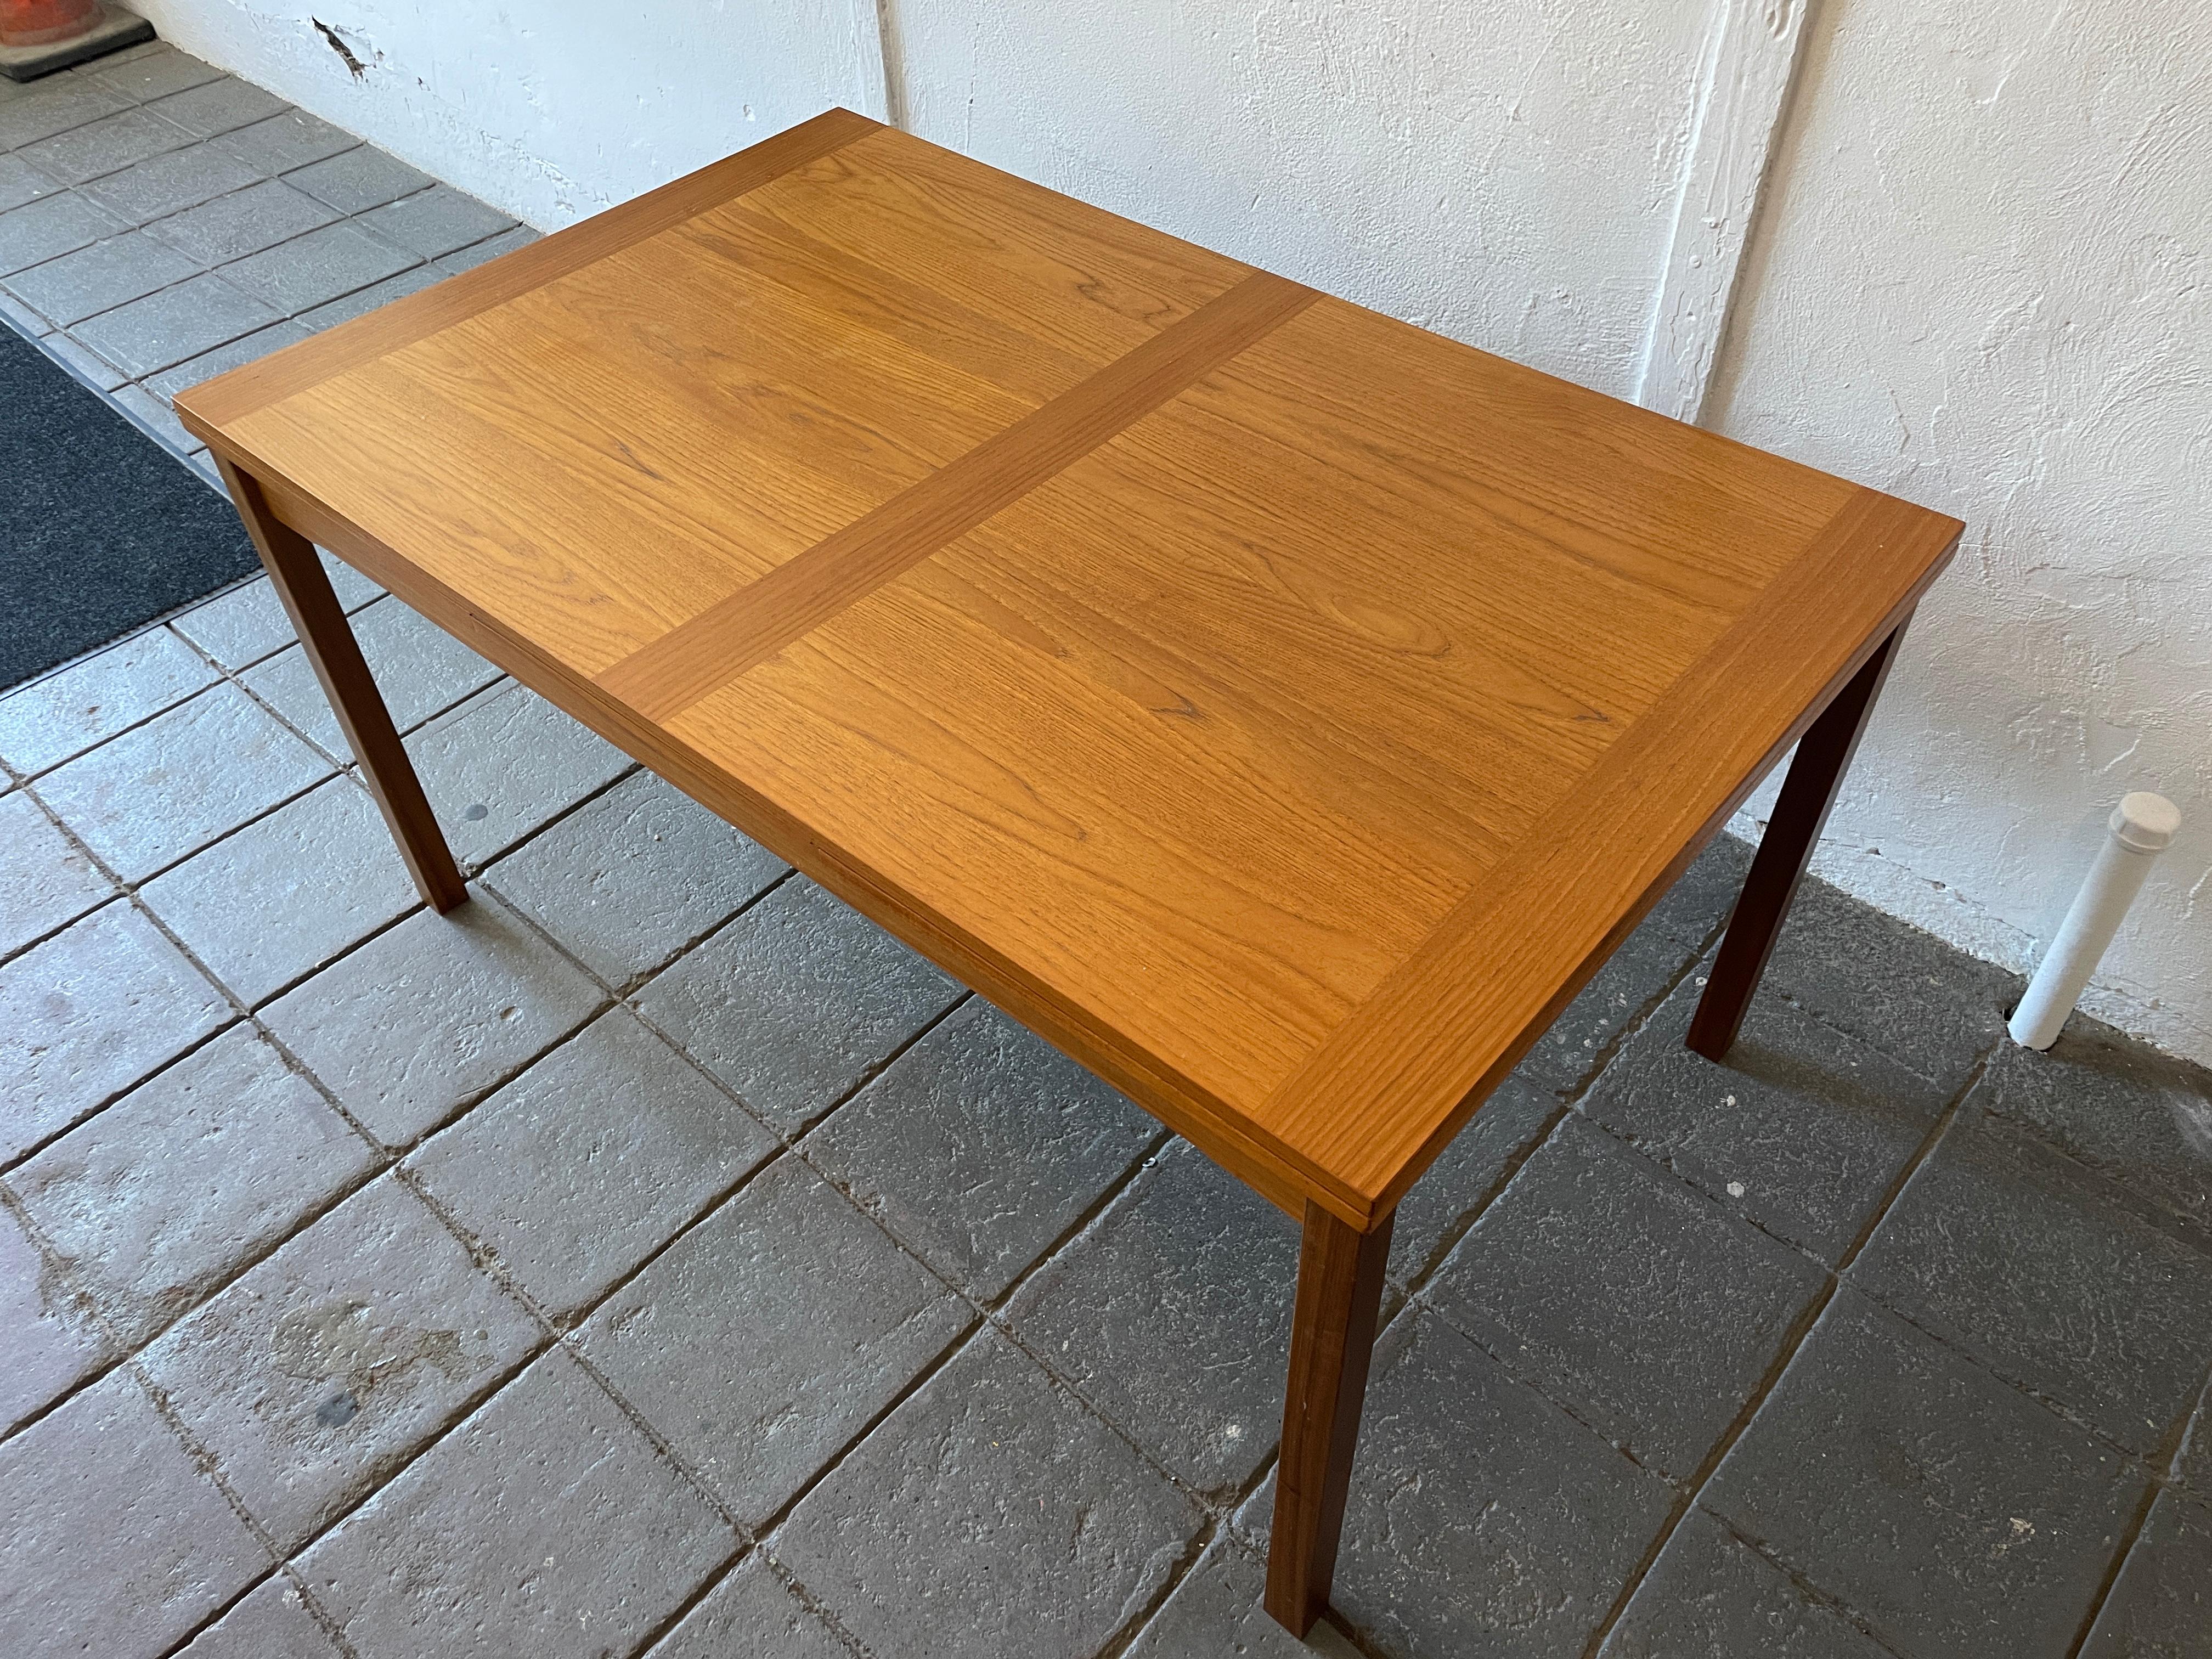 Mid century Danish modern teak extension dining table Denmark. Great Size Dining table with 2x 20” slide out hidden leaves. Rectangular design with solid teak square legs. Measures 57